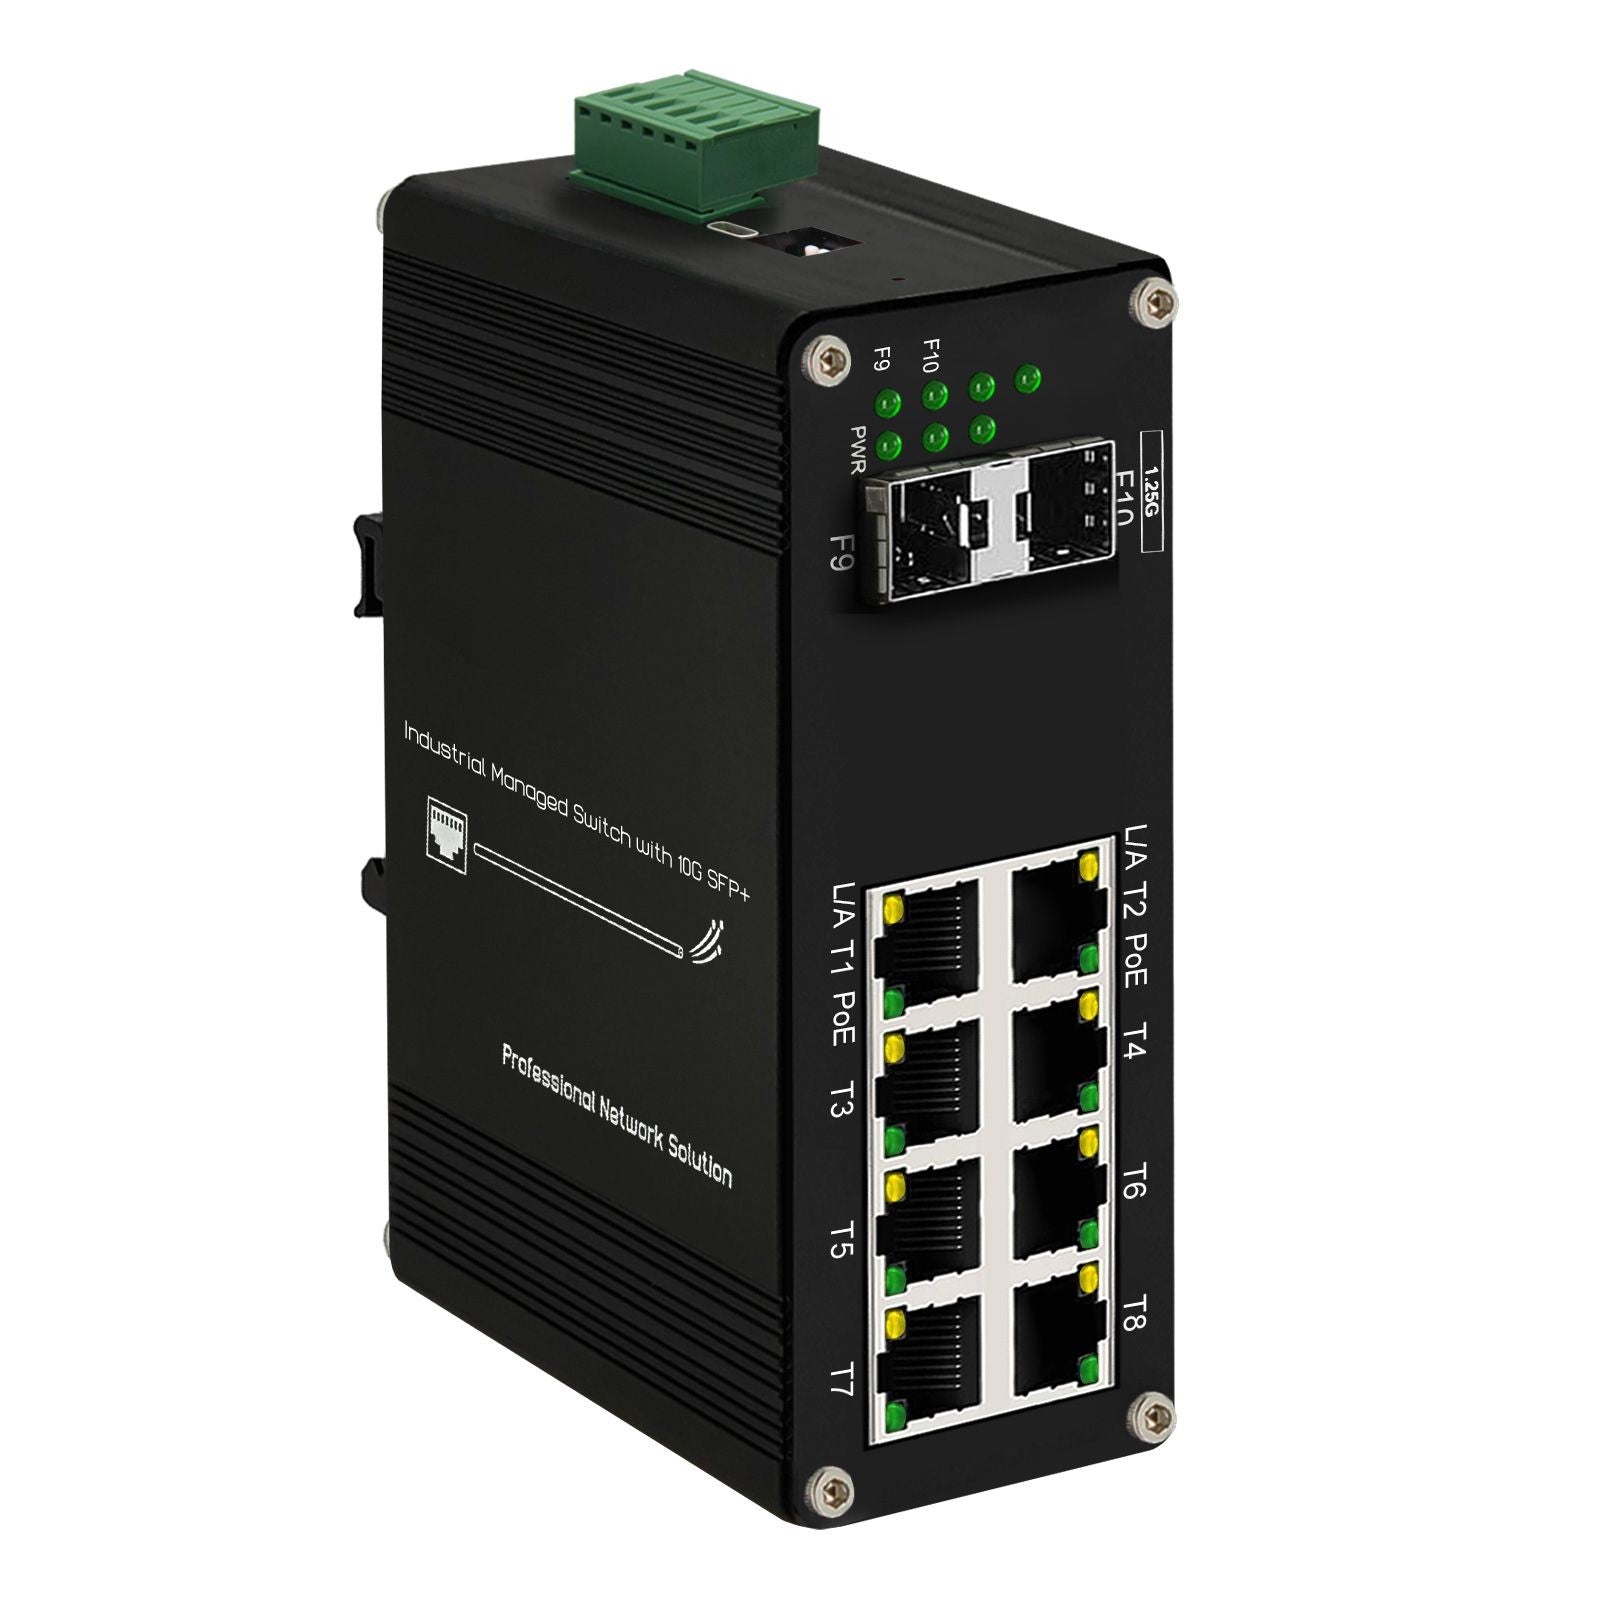 Industrial L2+ Managed PoE Switch 8 Port 10/100/1000T 802.3at To 2 Port 100/1000X SFP Din Rail Gigabit Network Switch 48VDC -MackTechBiz